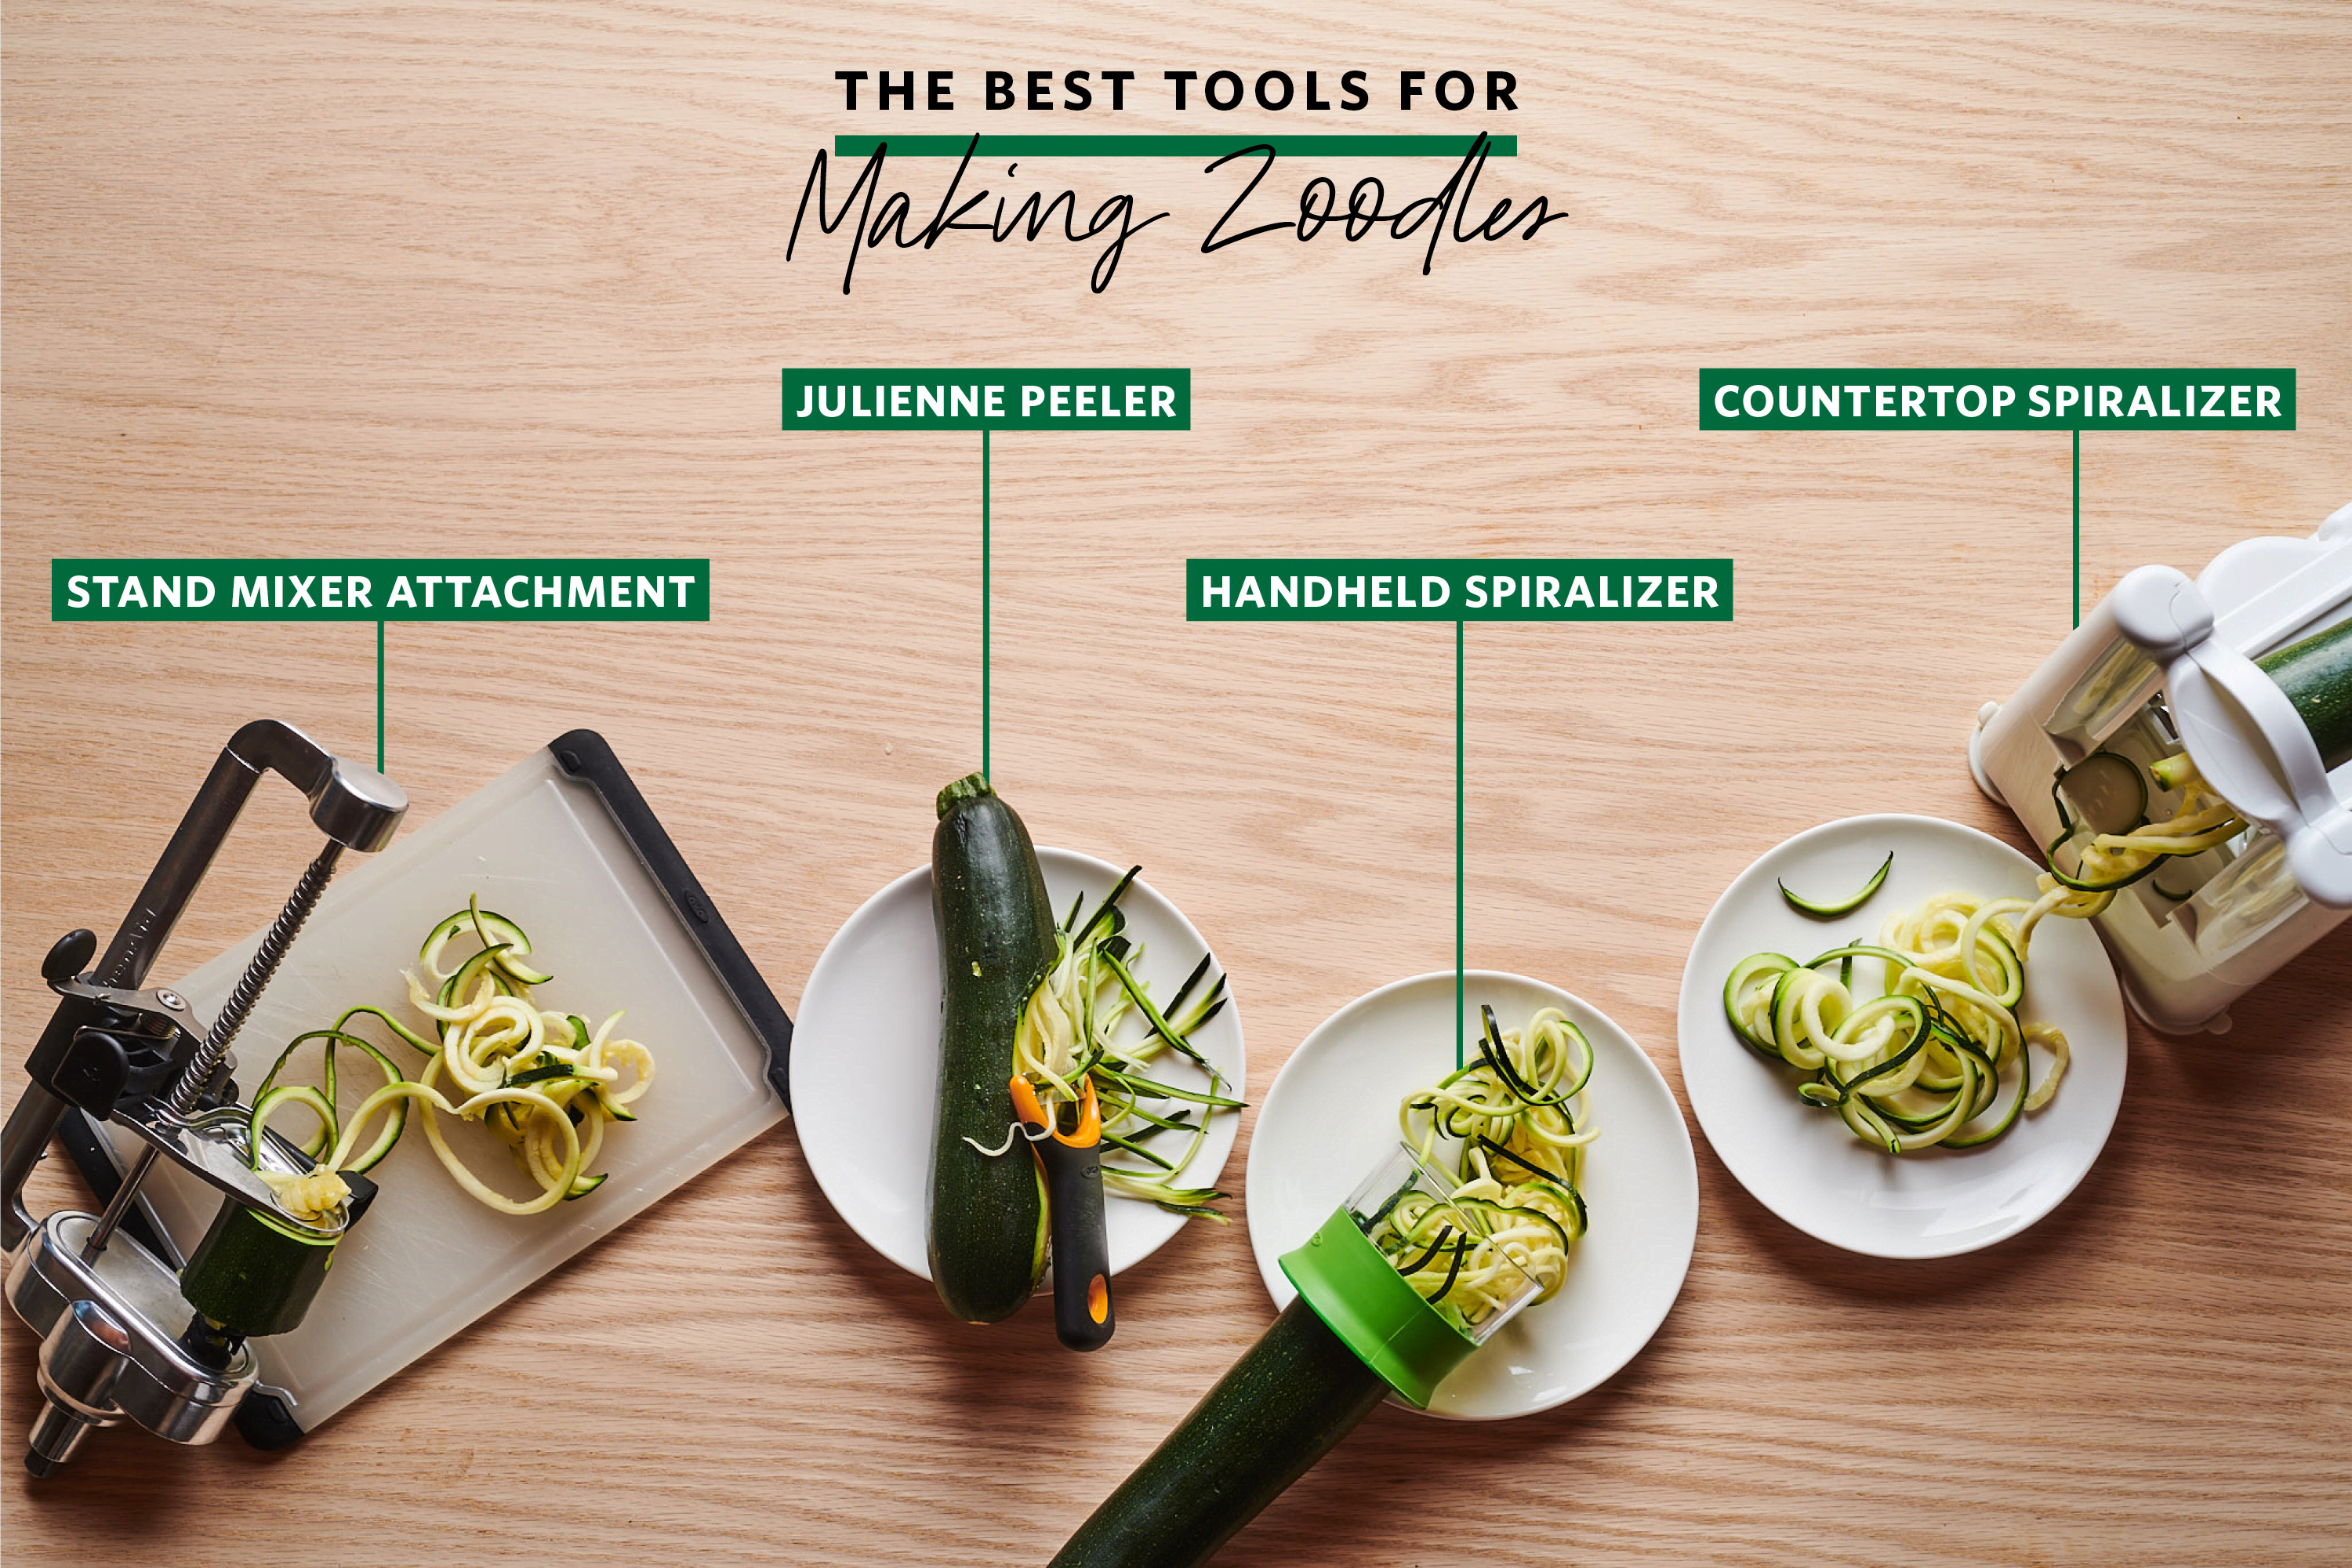 https://cdn.apartmenttherapy.info/image/upload/v1624385308/k/Photo/Series/2021-05-tools-showdown-zoodles/tools-showdown-zoodles-lead.png